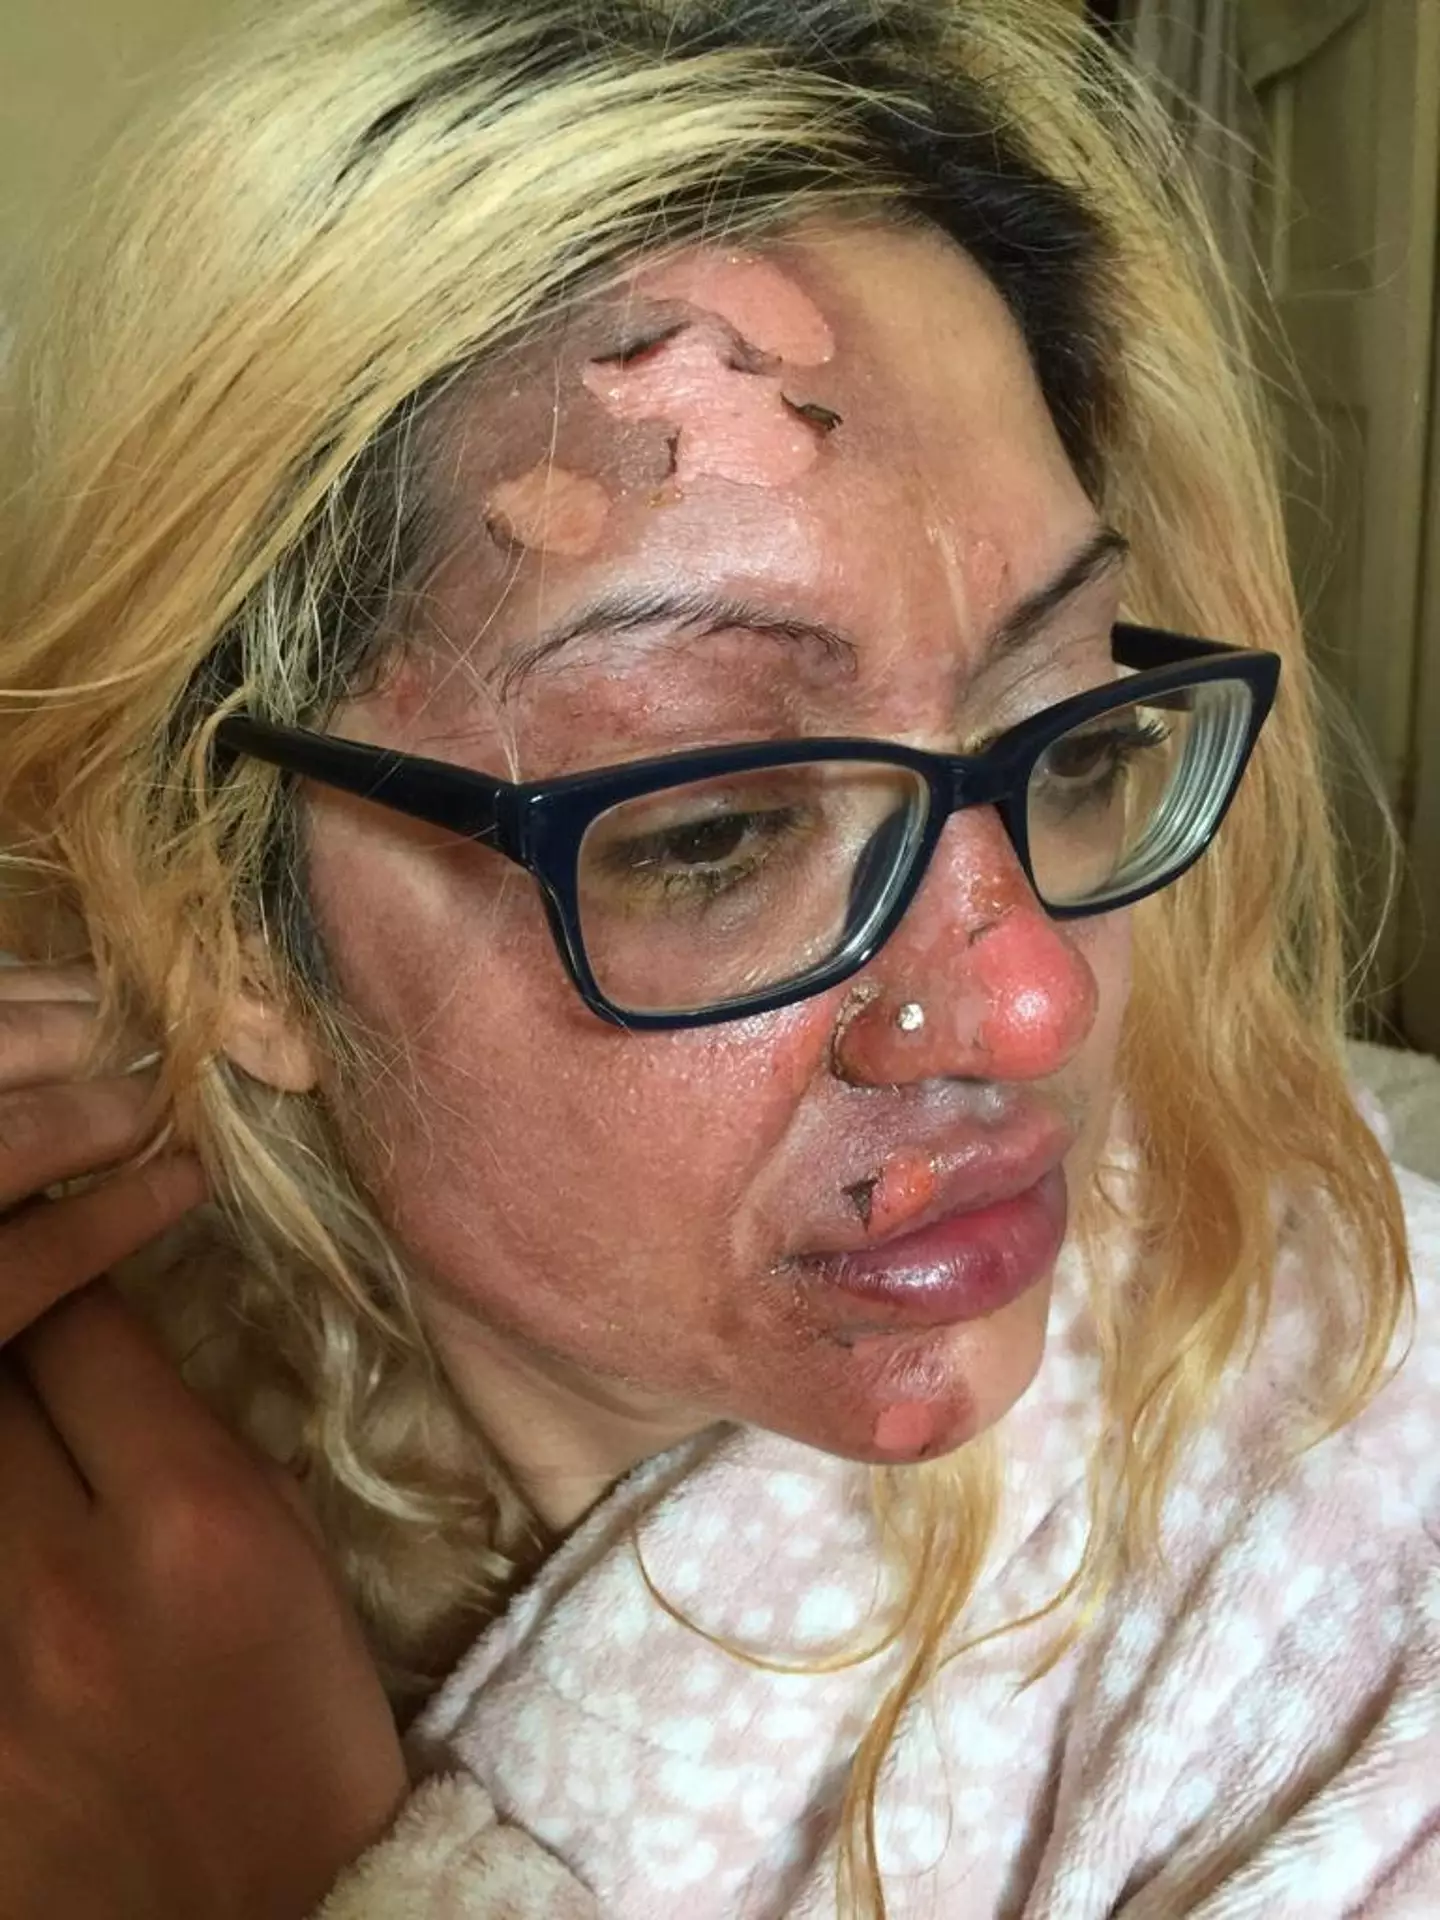 A mum who tried a TikTok trend was left in 'absolute agony' after an egg exploded in her face.